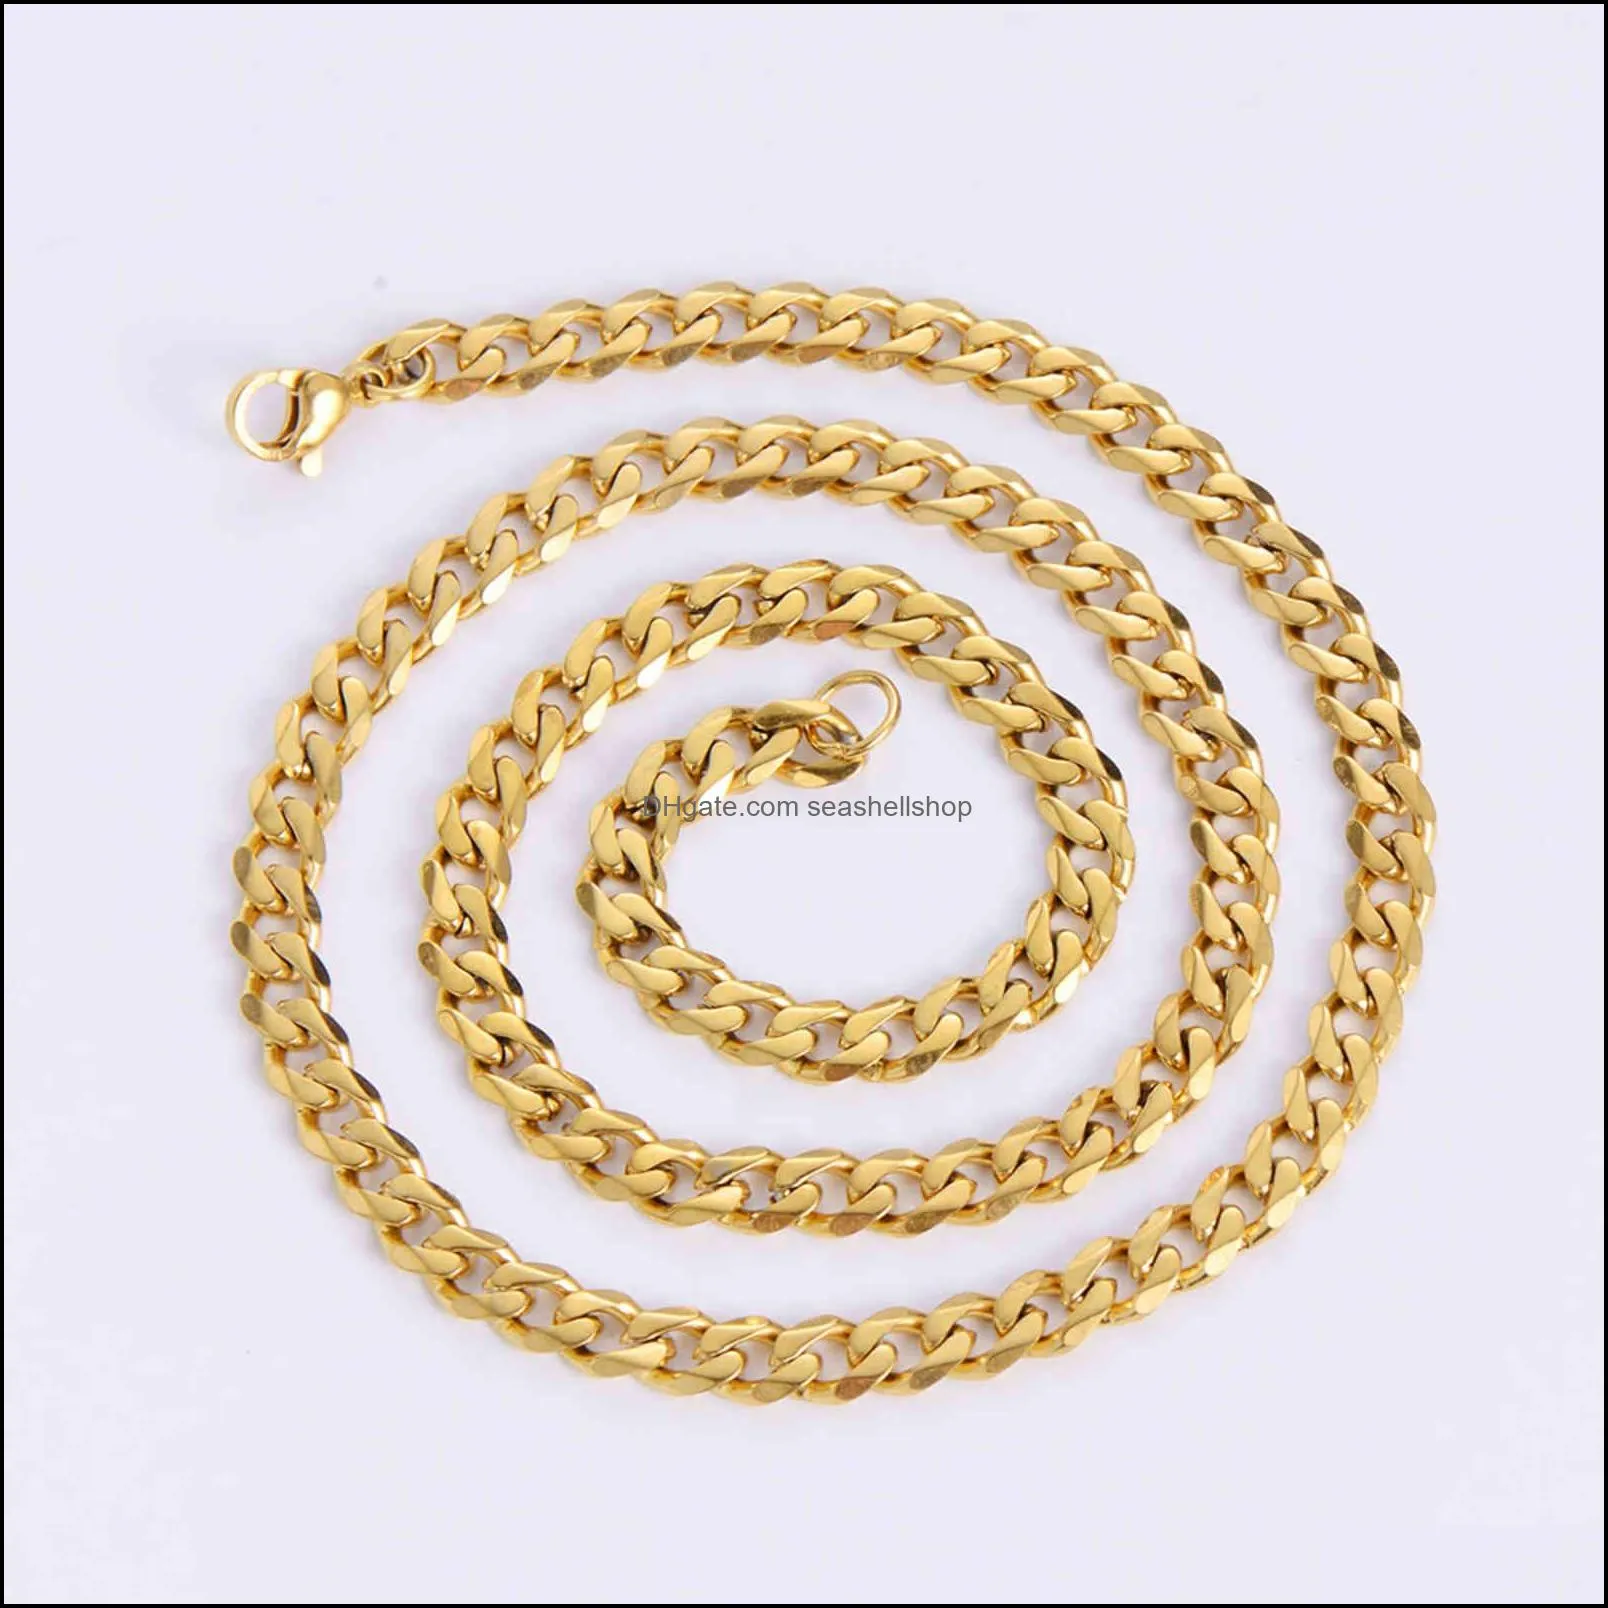 wholale hip hop womens men necklac cadenas cubanas 18k gold plated thick cuban link chain stainls steel